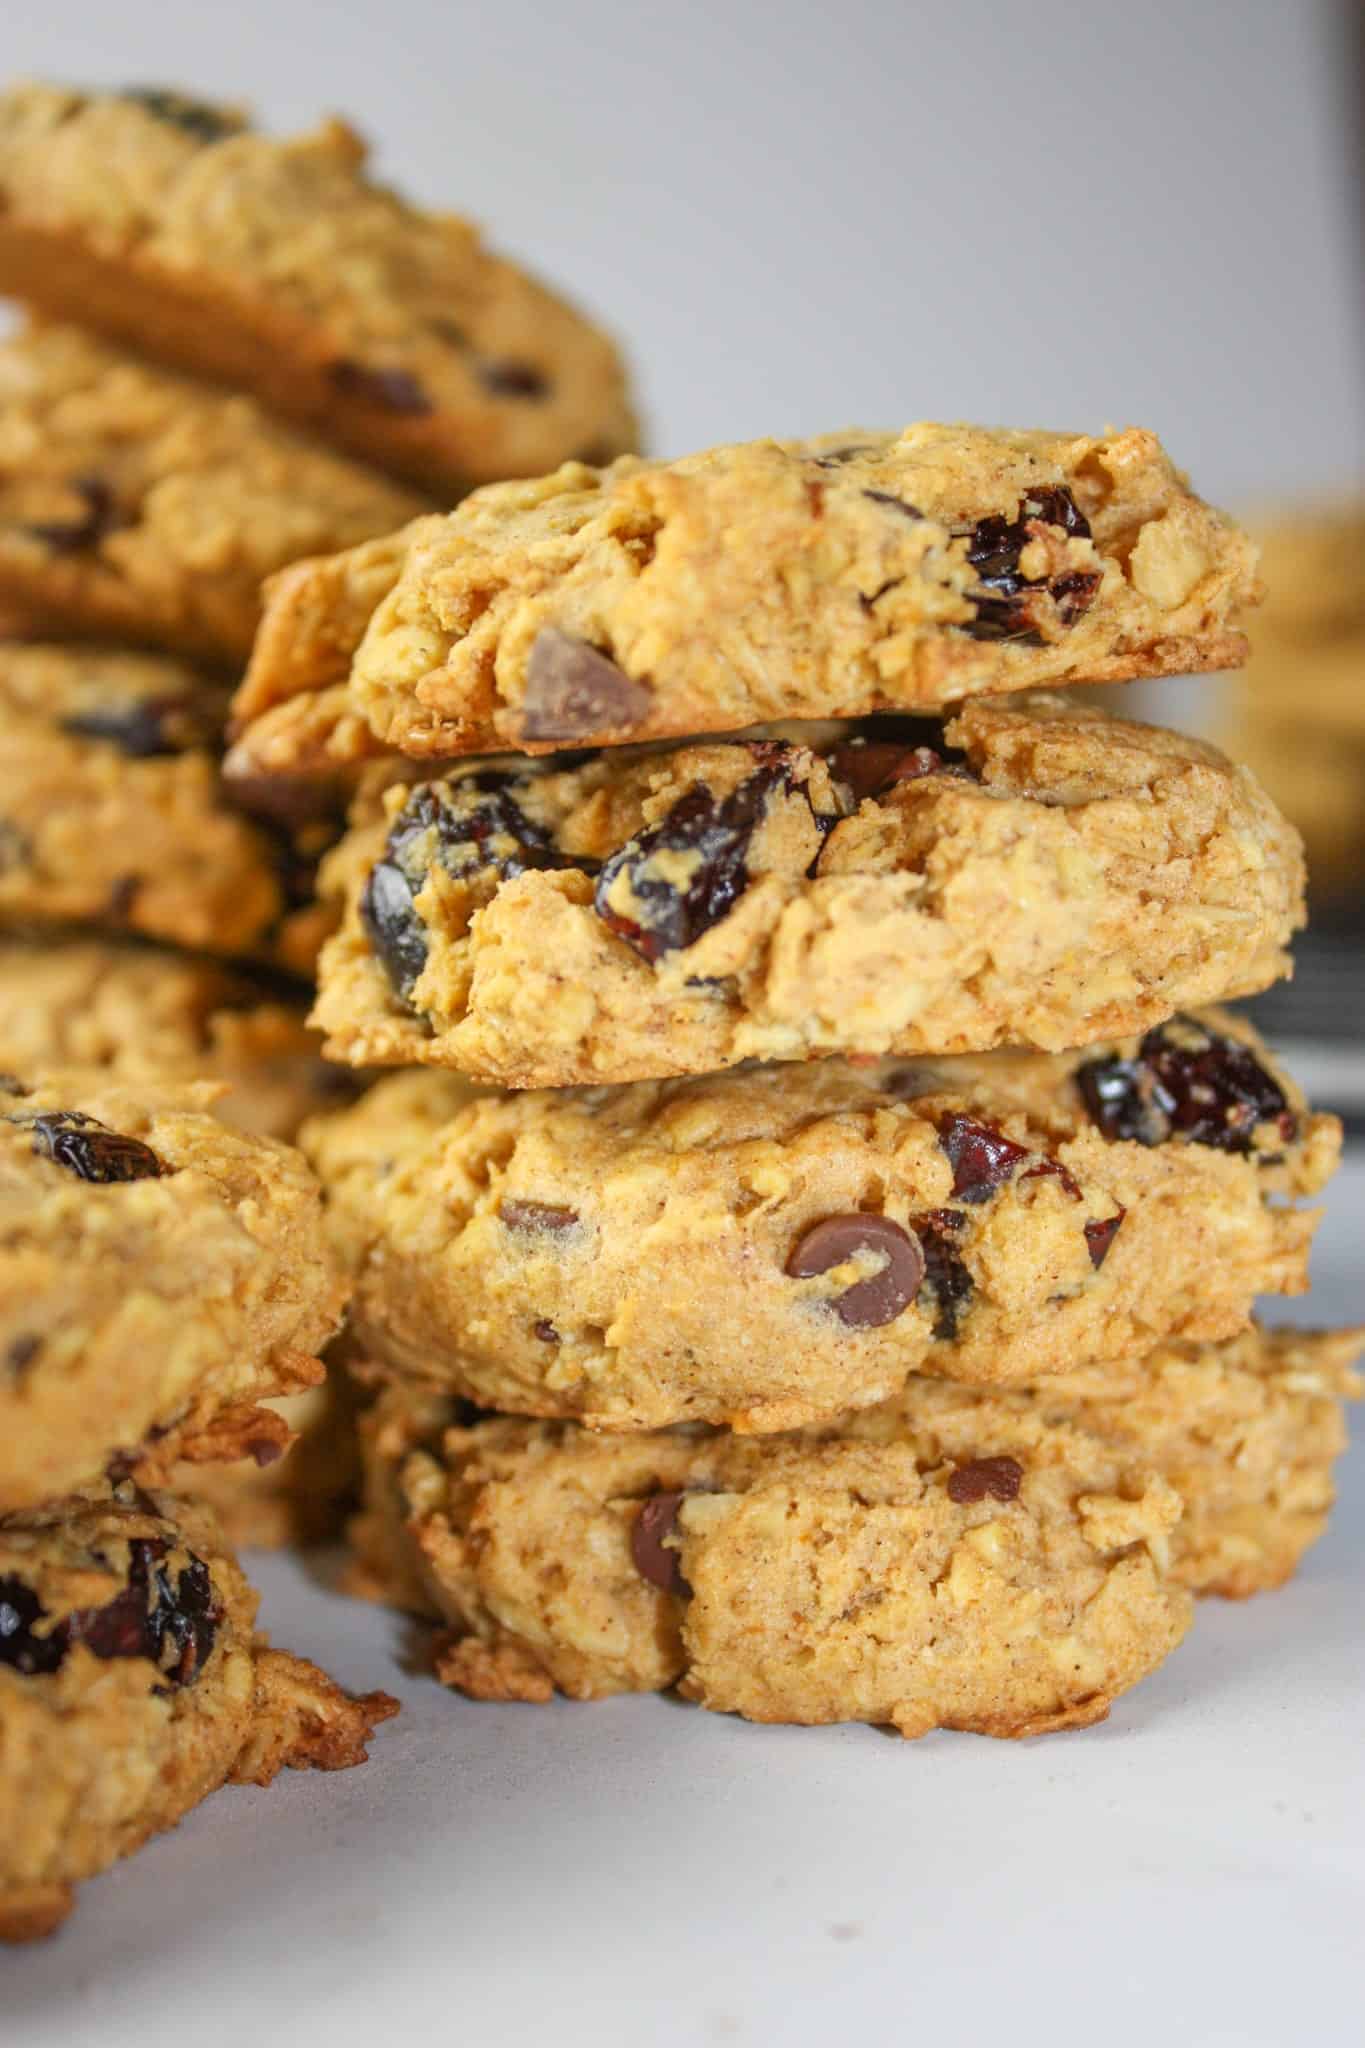 Flavours of Fall Cookies are loaded with seasonal ingredients.  This gluten free cookie recipe is bursting with the tastes of pumpkin, cranberries, oatmeal and spices that bring to mind cooler weather days!